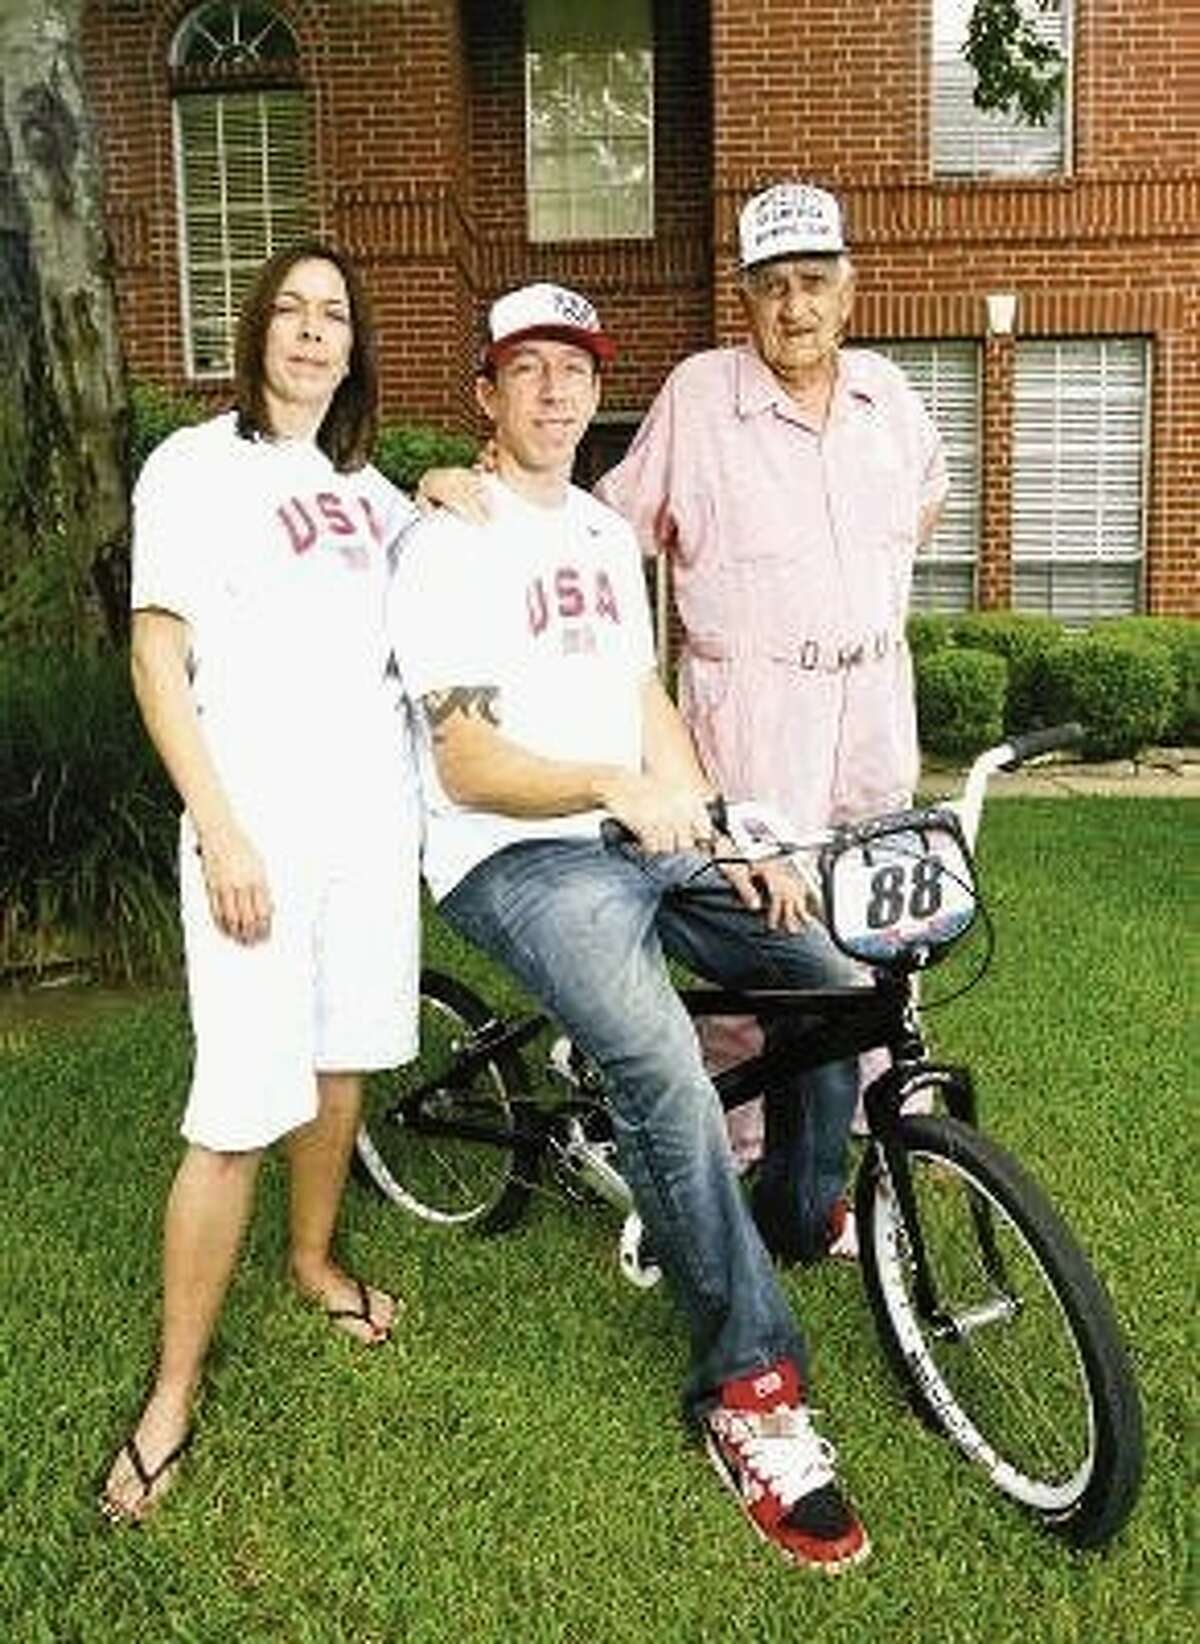 Kyle Bennett, center, poses outside his Conroe home with his mother Donnel Purse and his grandfather Don Collins. Purse and Collins provided the support Bennett needed to develop into a world champion BMX racing. However, Bennett, 33, died in a single-vehicle accident in West Montgomery County Oct. 14. An autopsy report released to The Courier Monday afternoon shows his blood alcohol level was 0.145, nearly twice the legal limit in Texas.